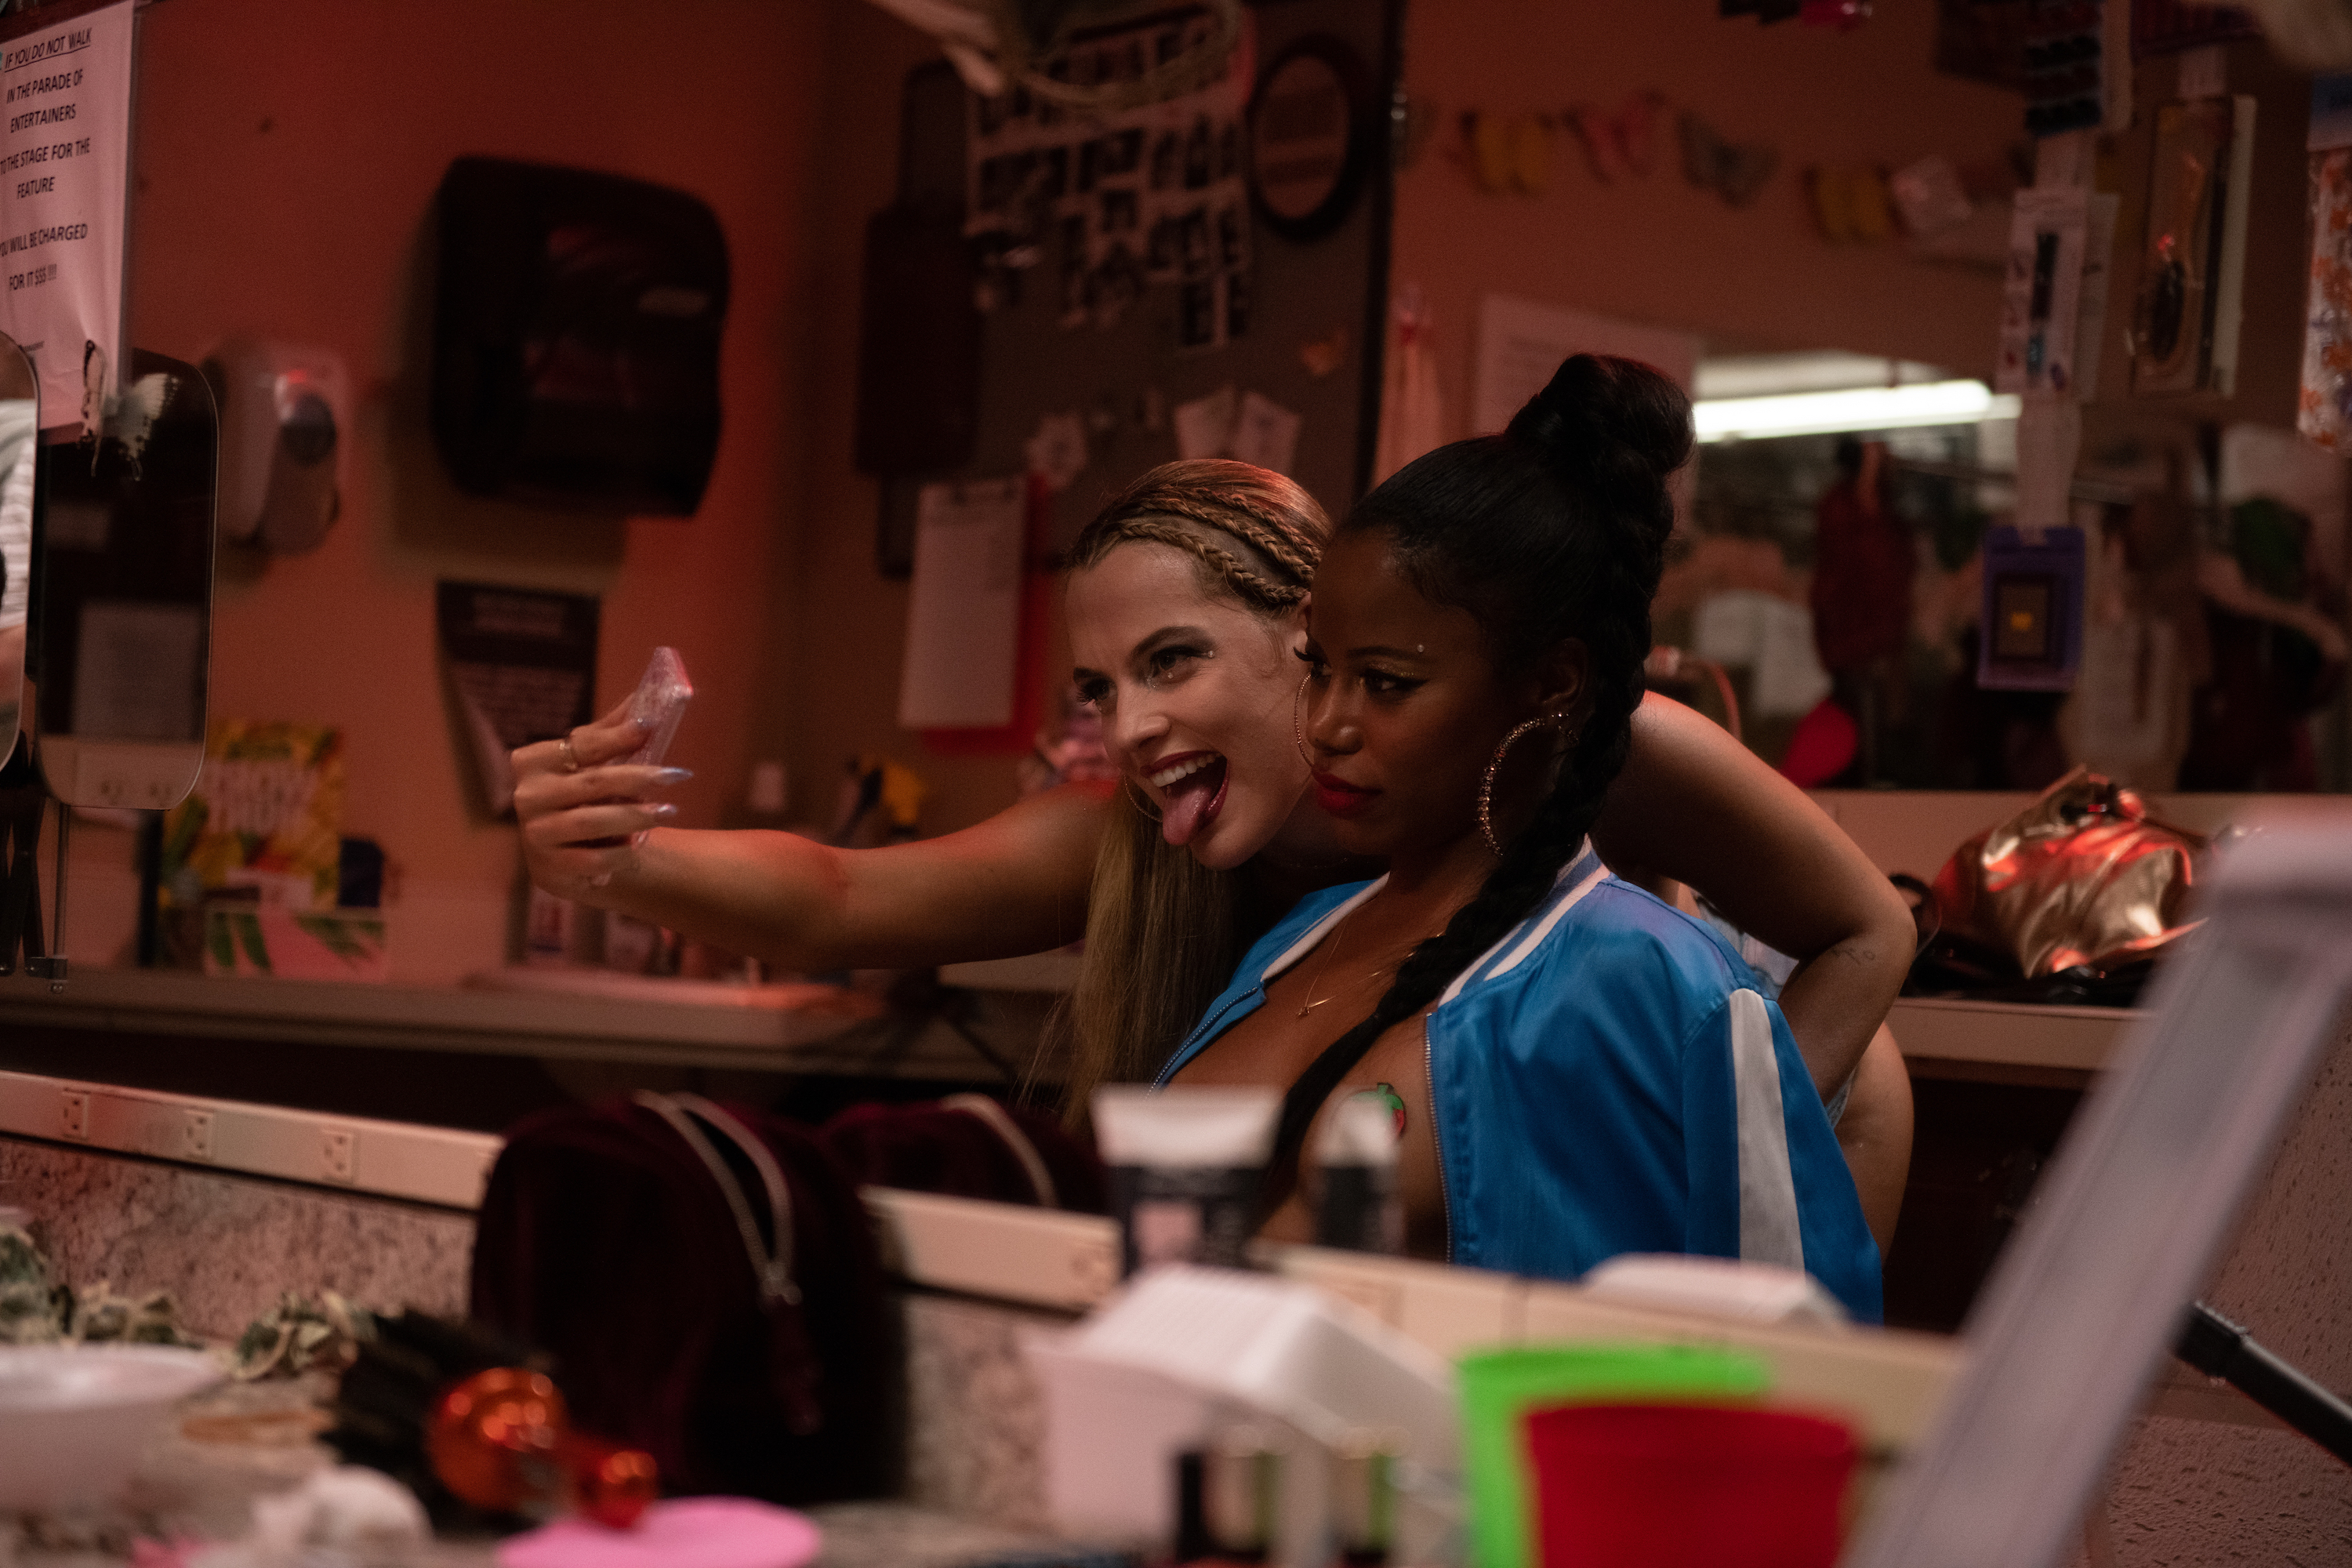 Riley Keough (left) stars as Stefani and Taylour Paige (right) stars as Zola in director Janicza Bravo's ZOLA, an A24 Films release. Cr. Anna Kooris / A24 Films